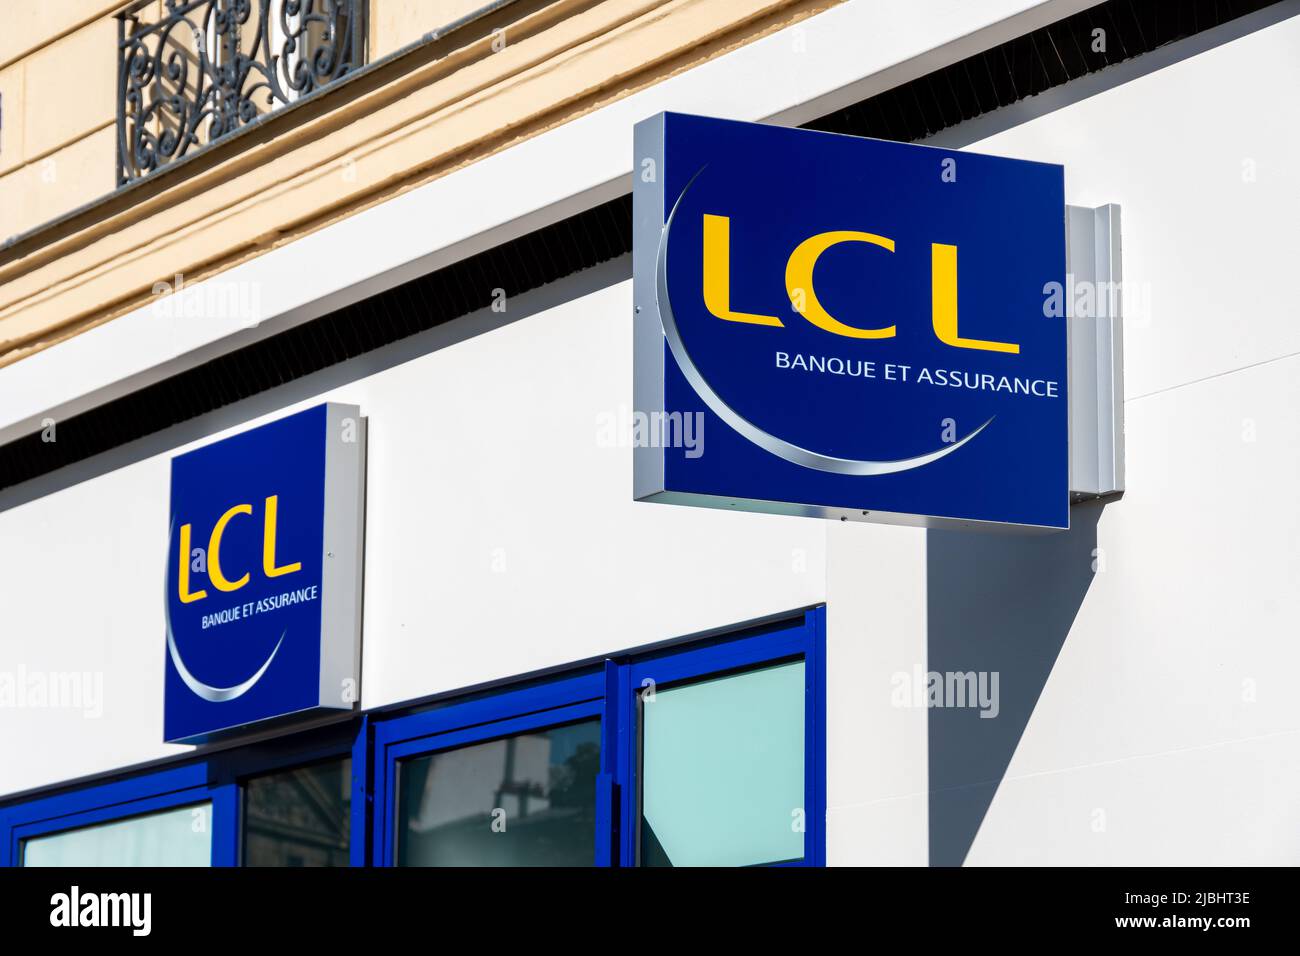 French bank LCL (Le Credit Lyonnais) sign and logo outside a bank branch in Paris, France Stock Photo